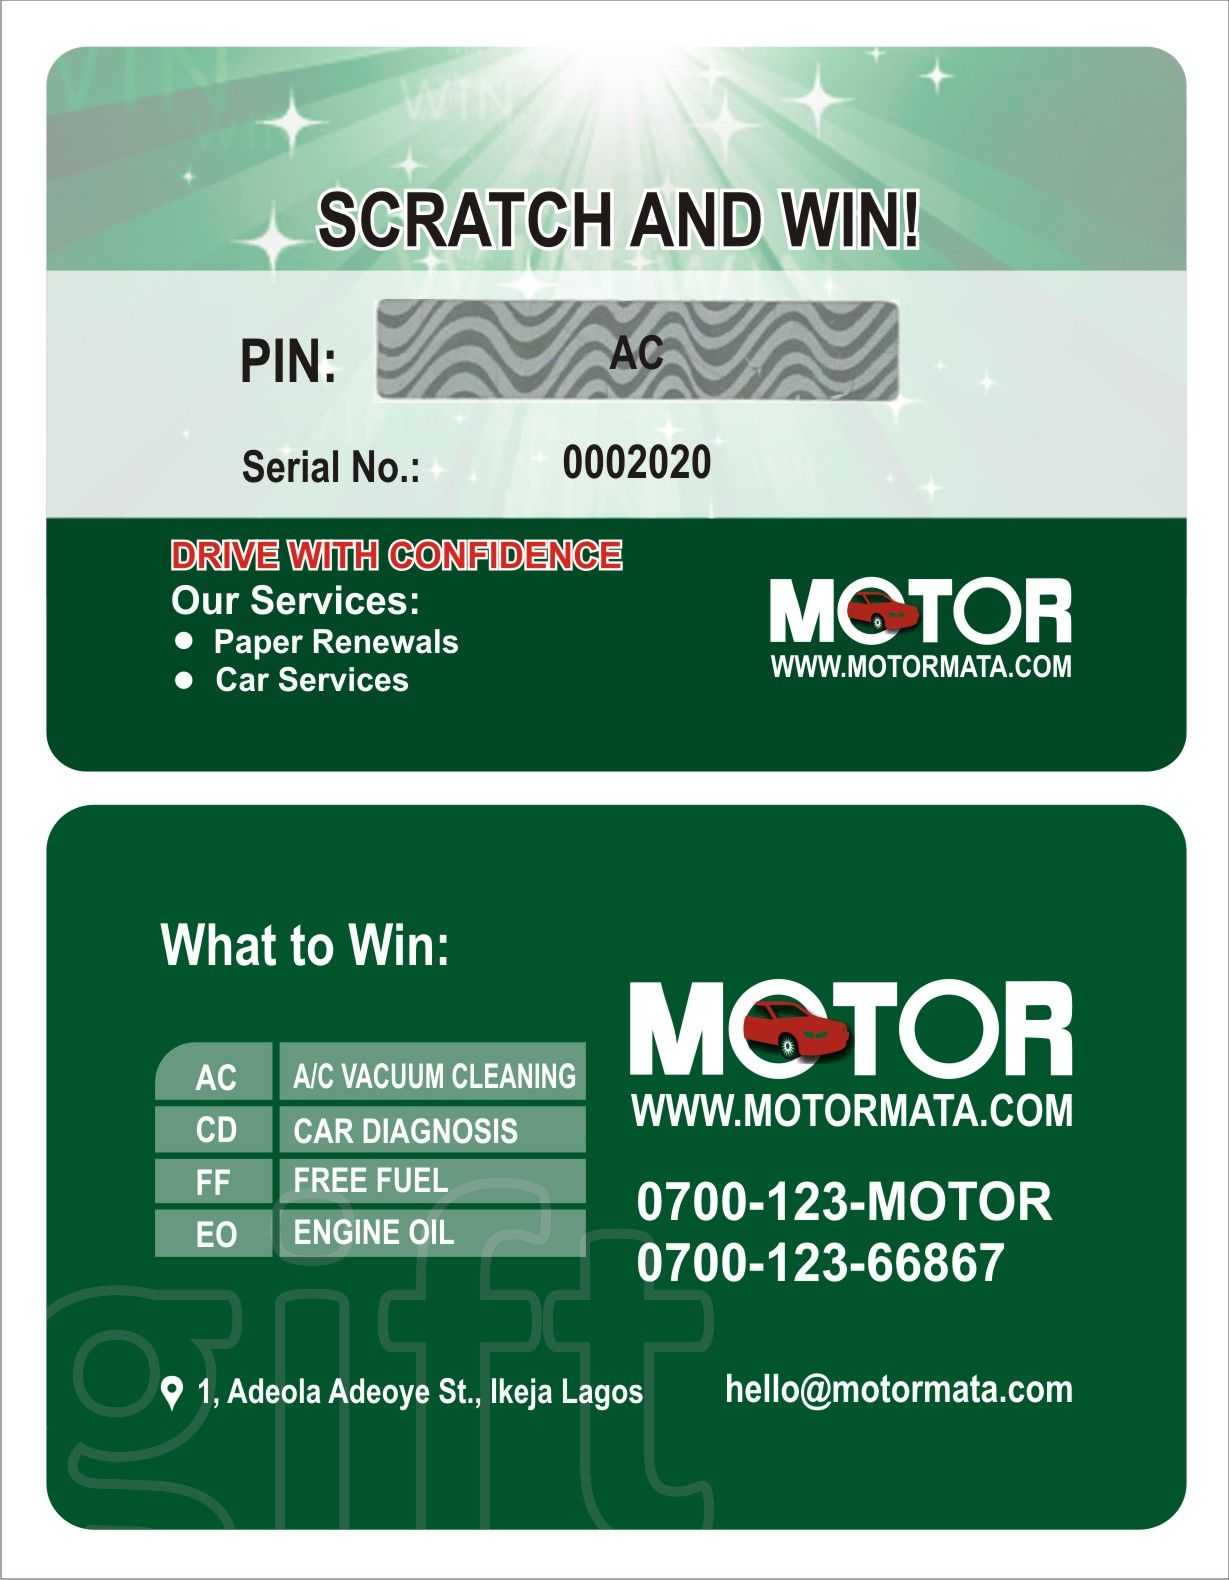 CALL BUKOLA ON 09099355873 FOR YOUR SCRATCH AND WIN PROMO CARDS